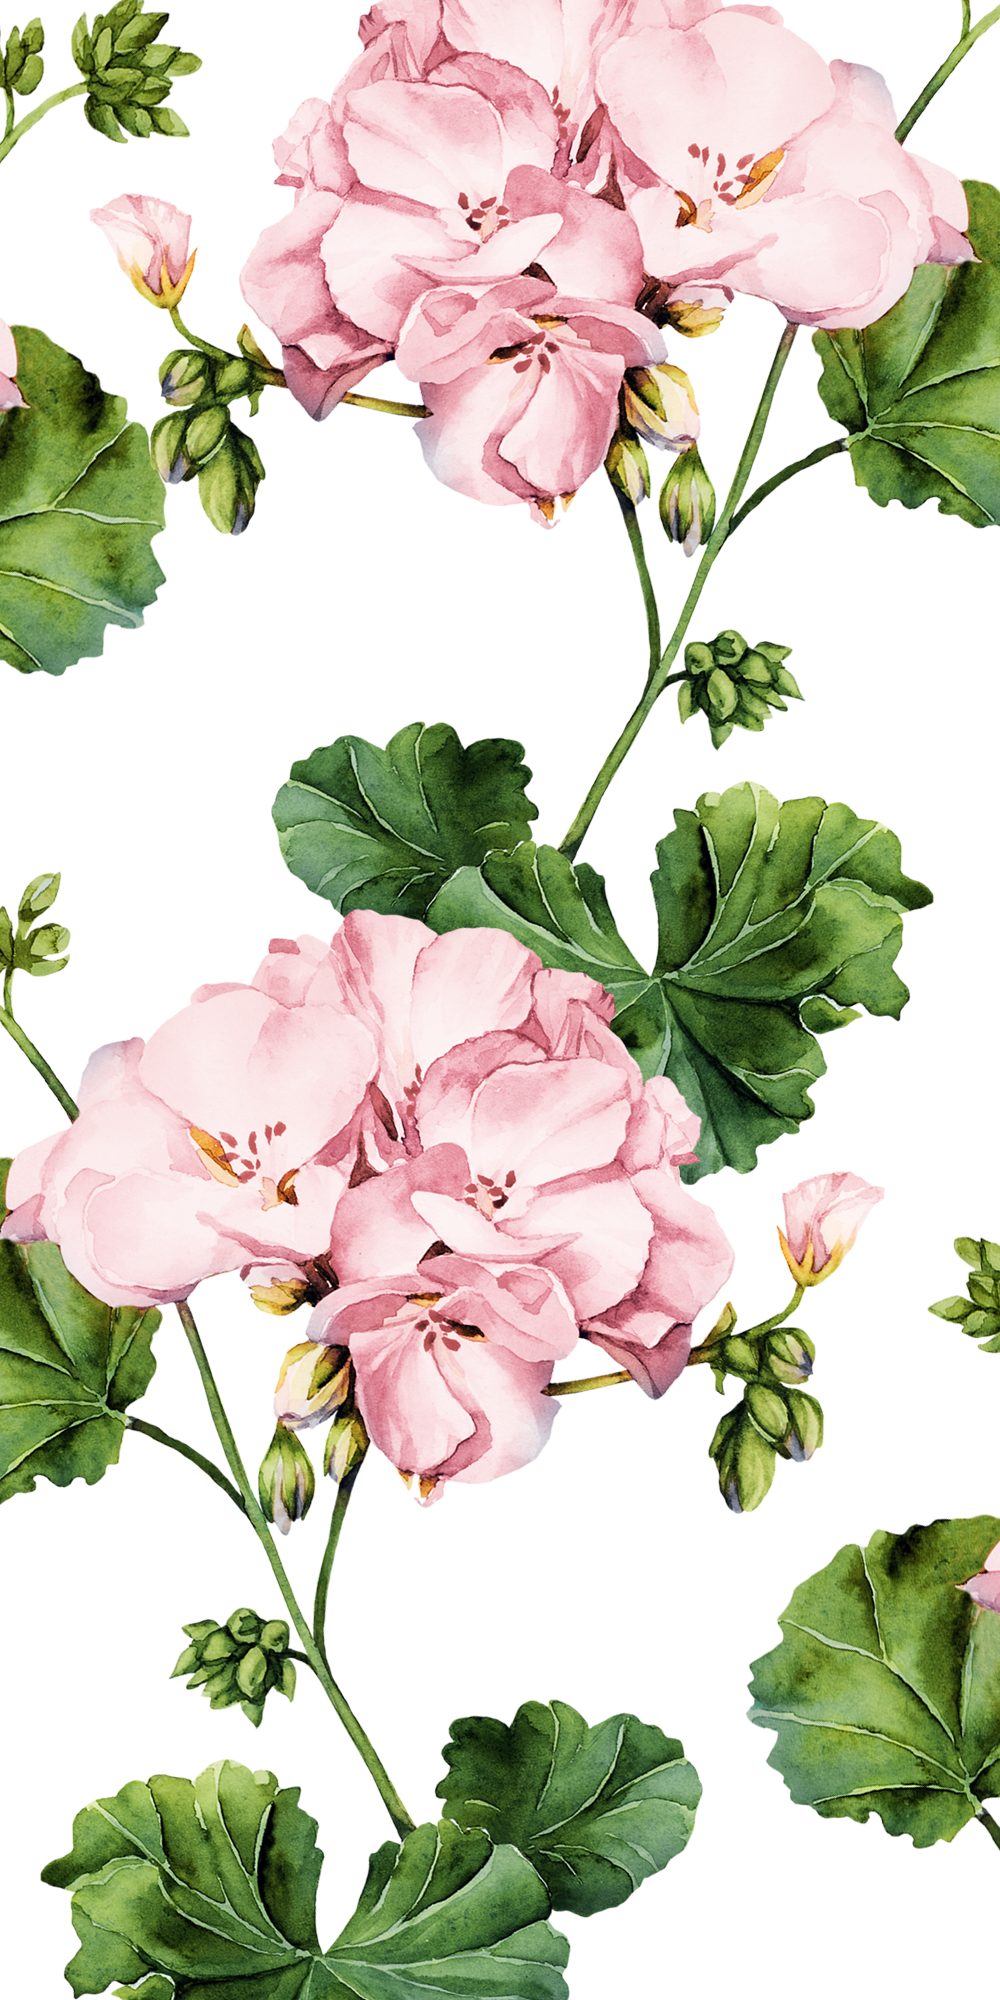 How about a new #floral #wallpaper for your #iPhone? #Casetify #Flowers # Geranium #Art #Design. Floral wallpaper iphone, Flower painting, Flower phone wallpaper